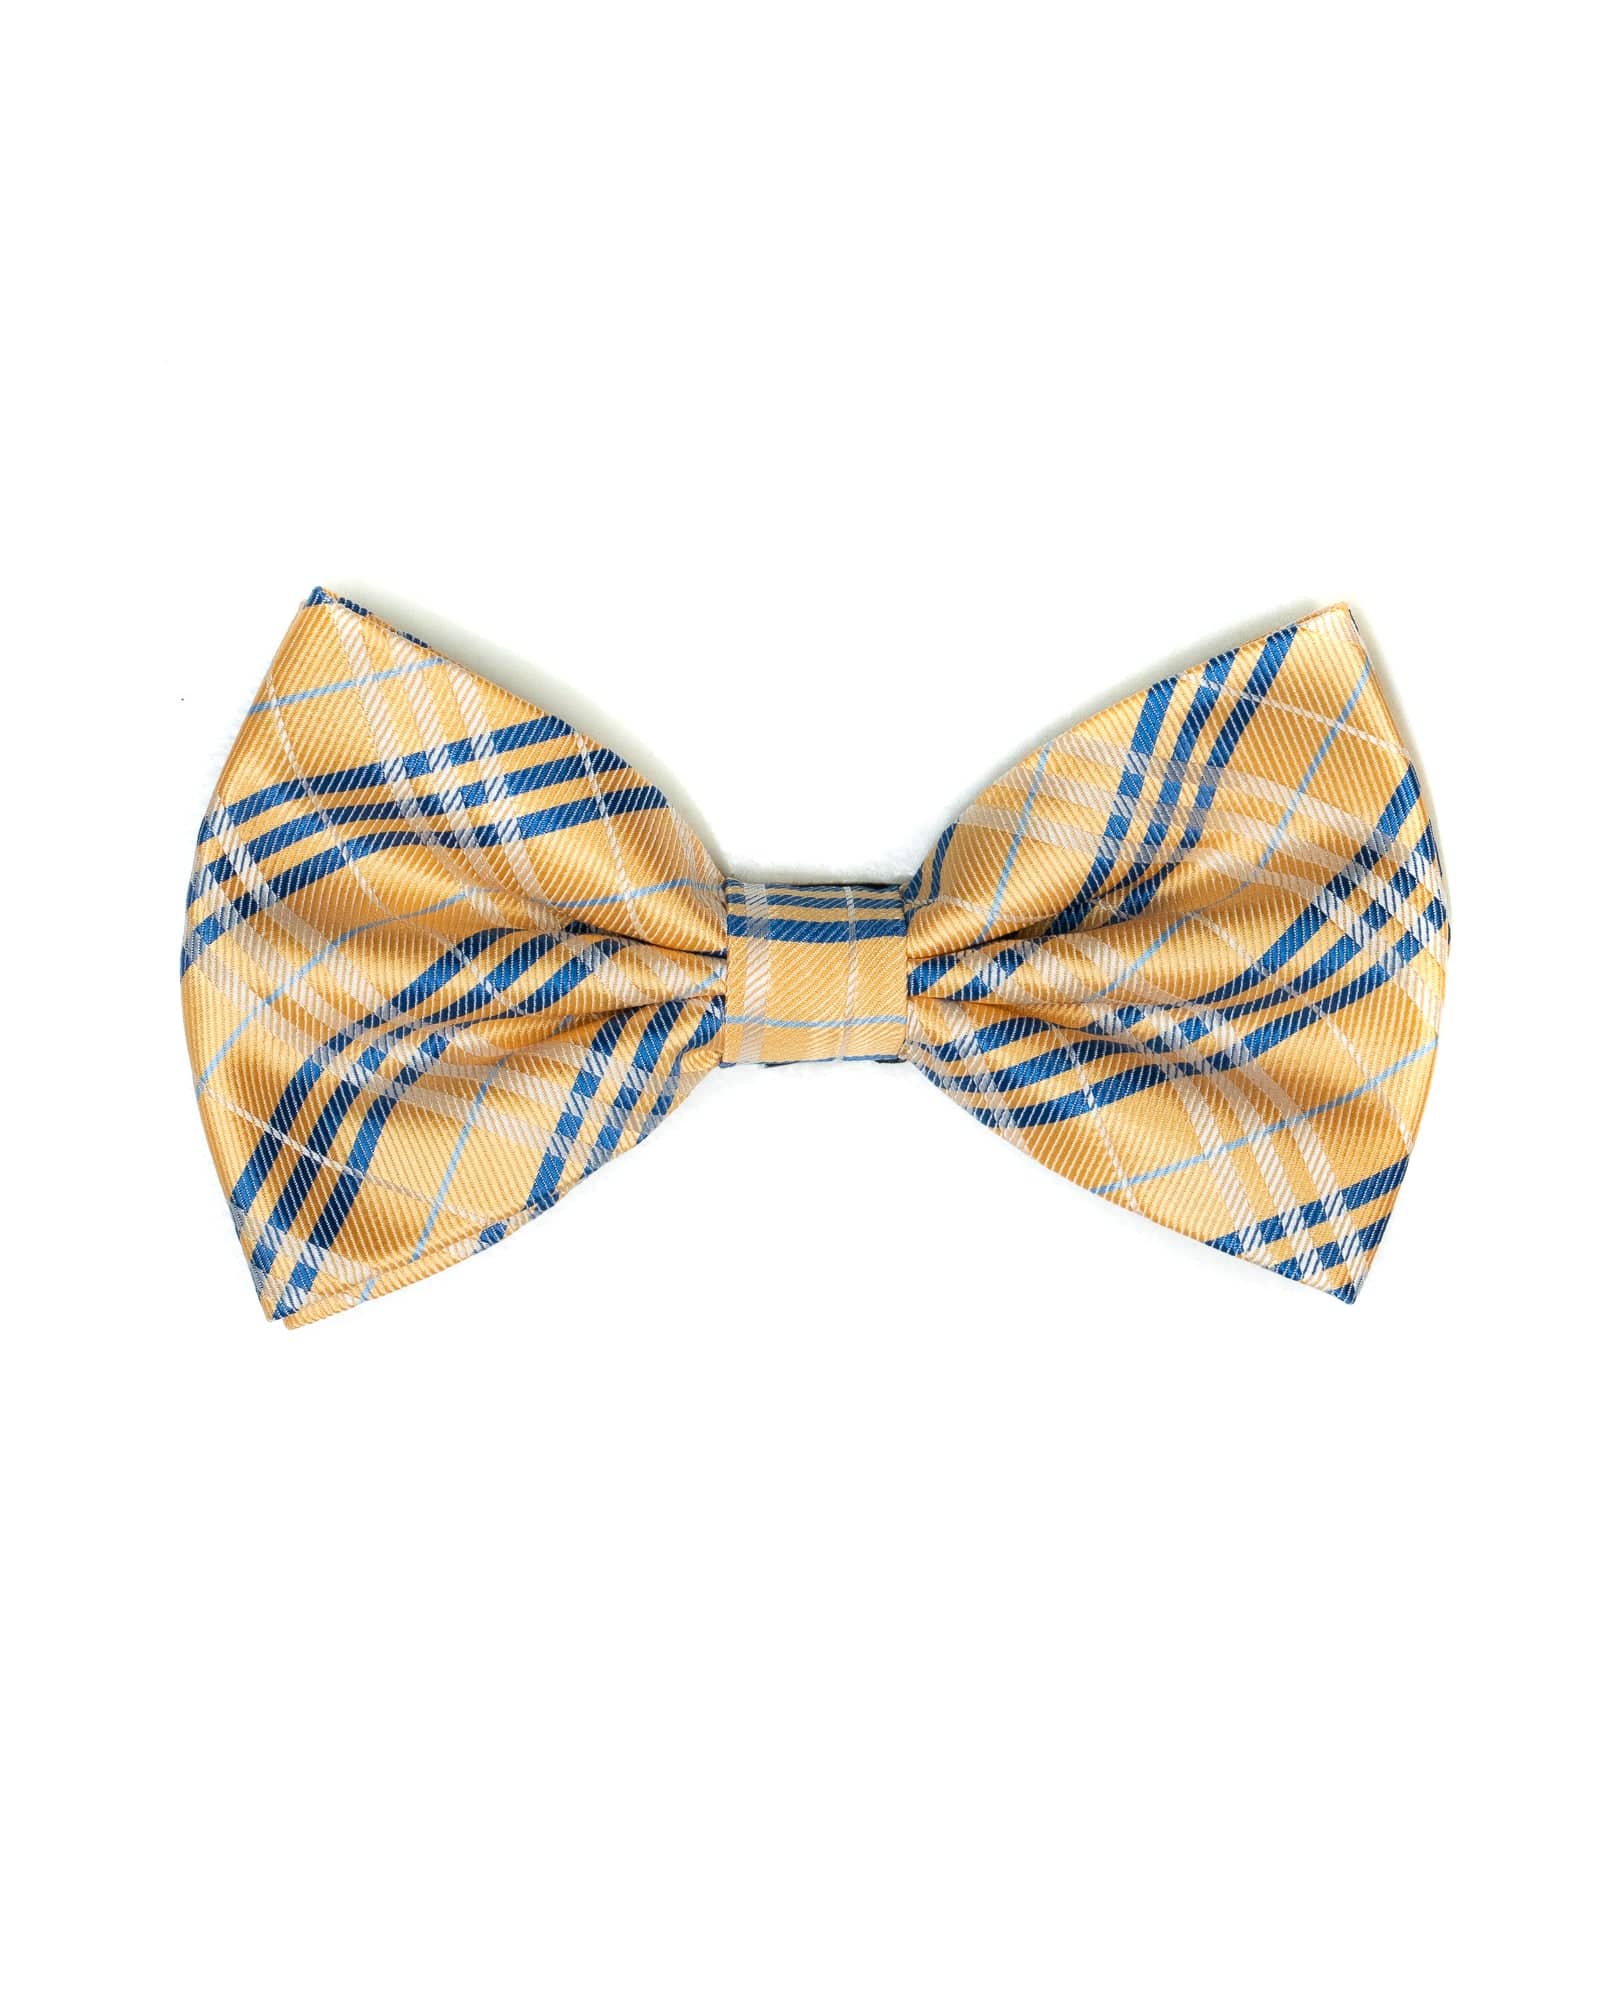 Bow Tie In Plaid Pattern Yellow & Blue - Rainwater's Men's Clothing and Tuxedo Rental